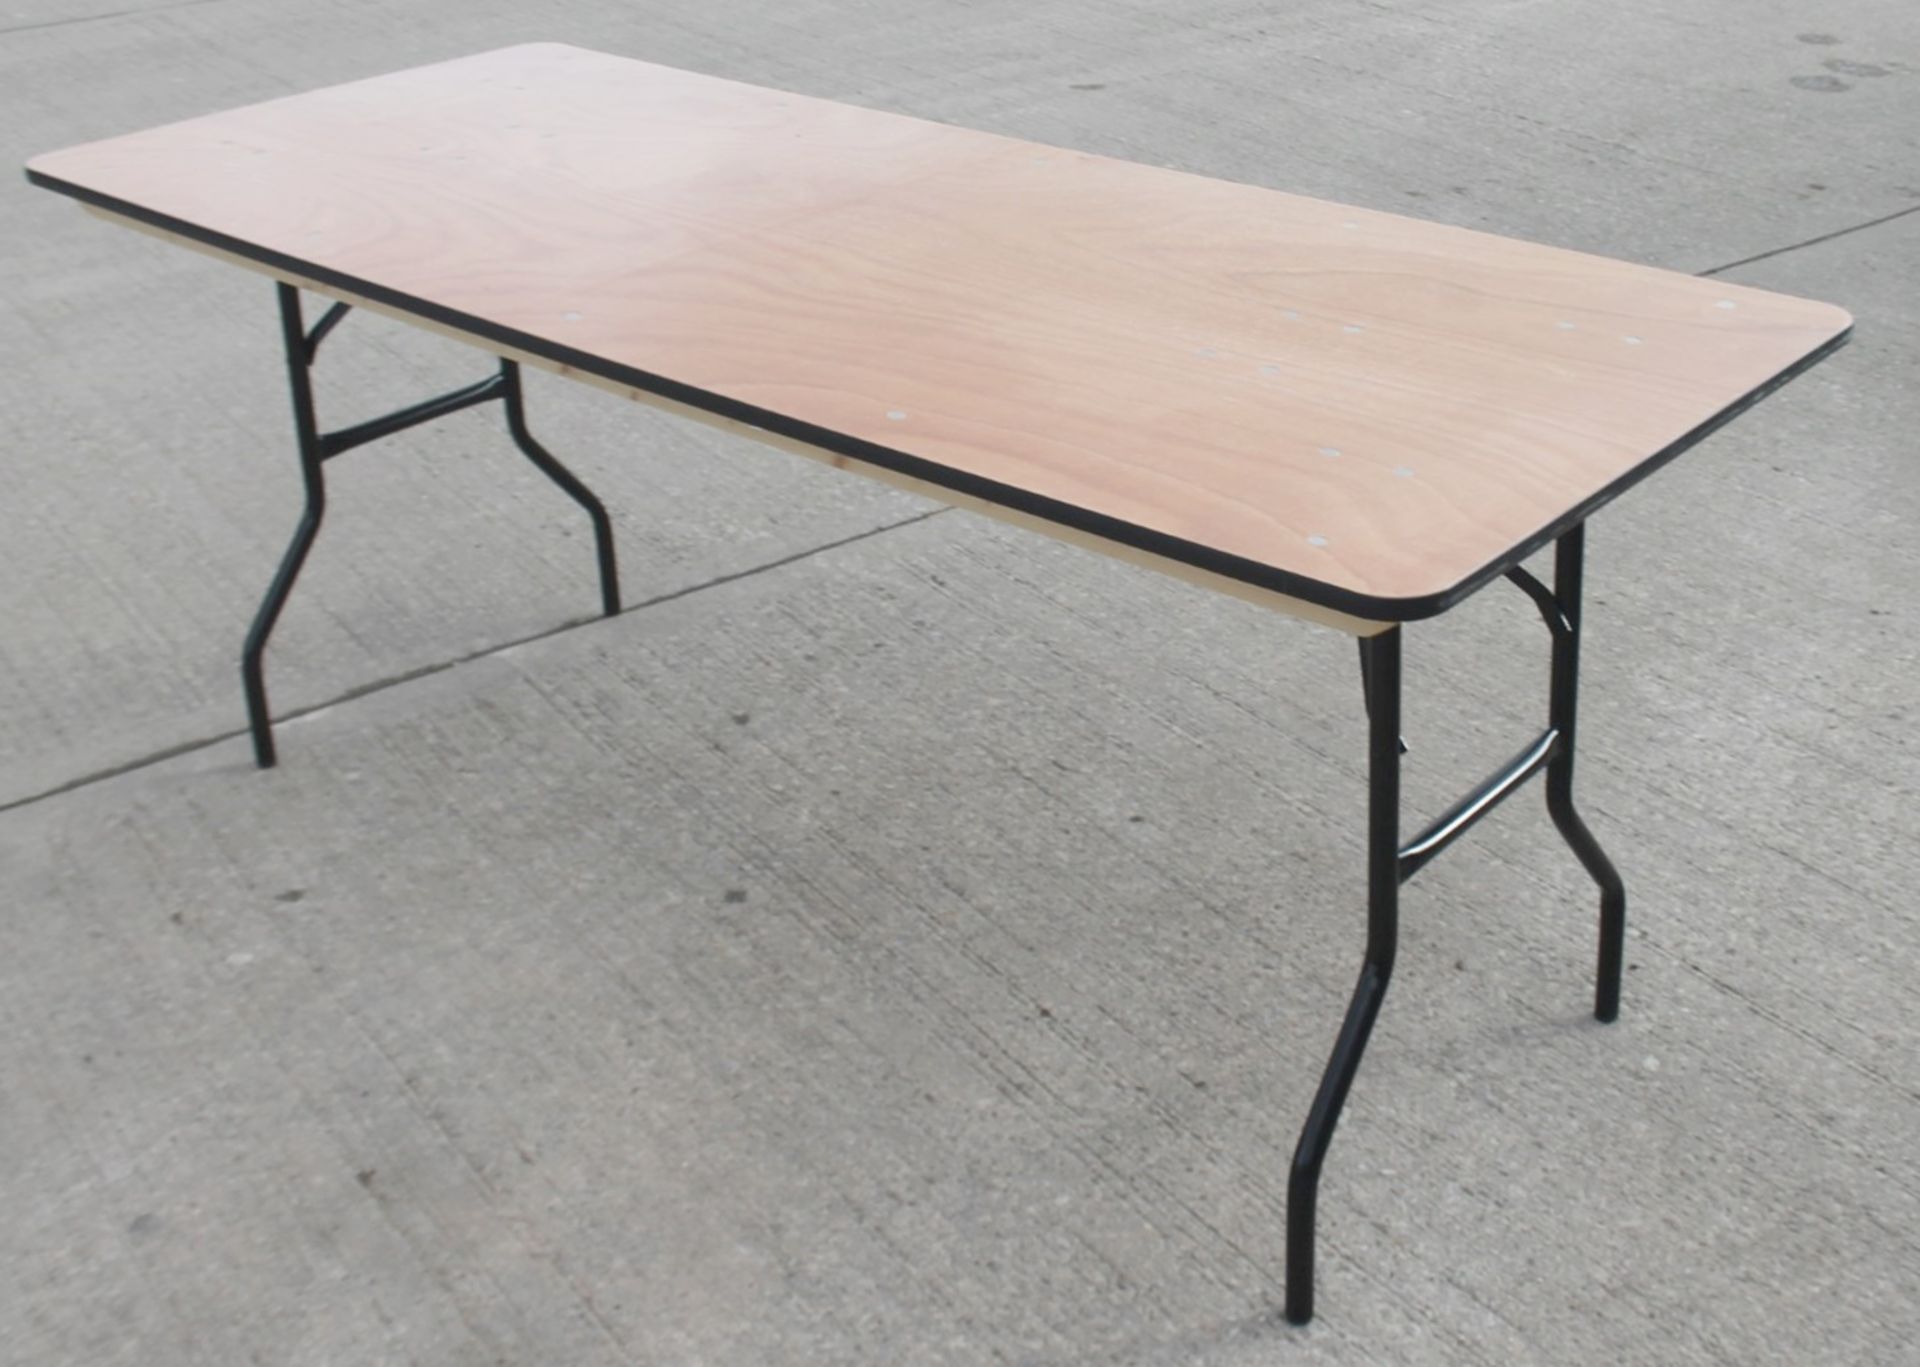 3 x Wooden Trestle Tables With Folding Tubular Metal Legs - From An Exclusive Property - Image 4 of 5